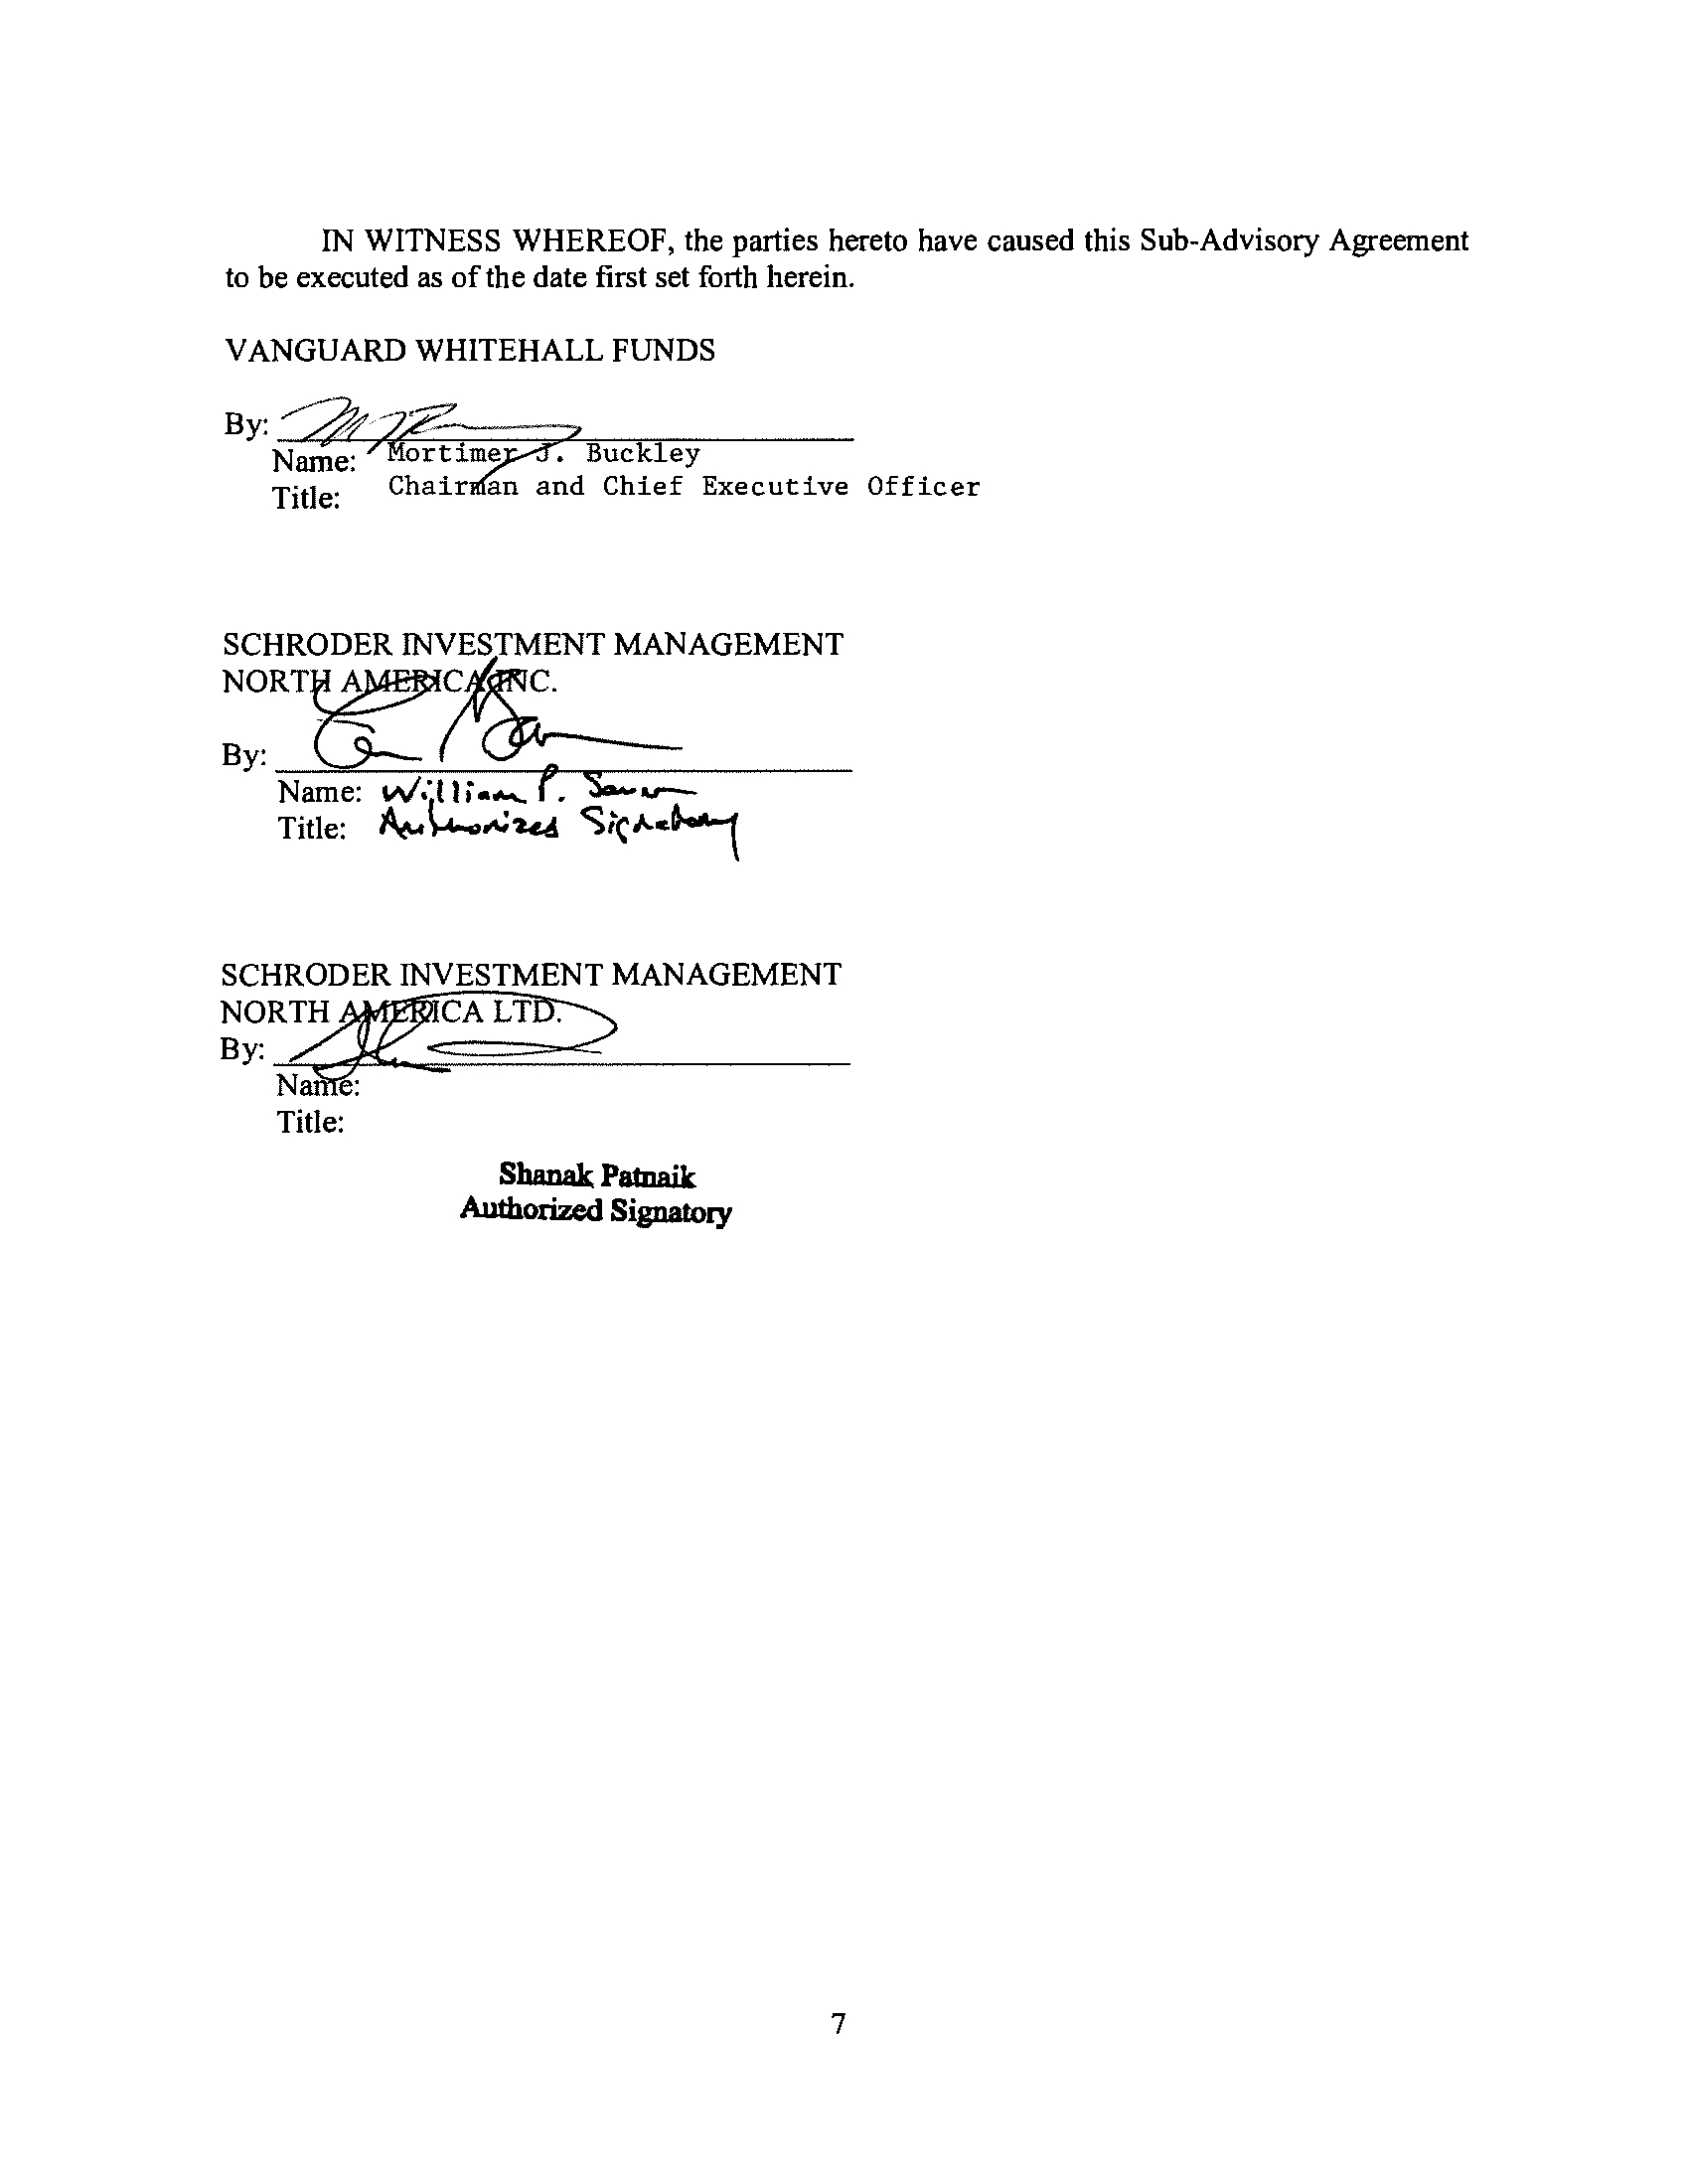 investment advisory agreement template